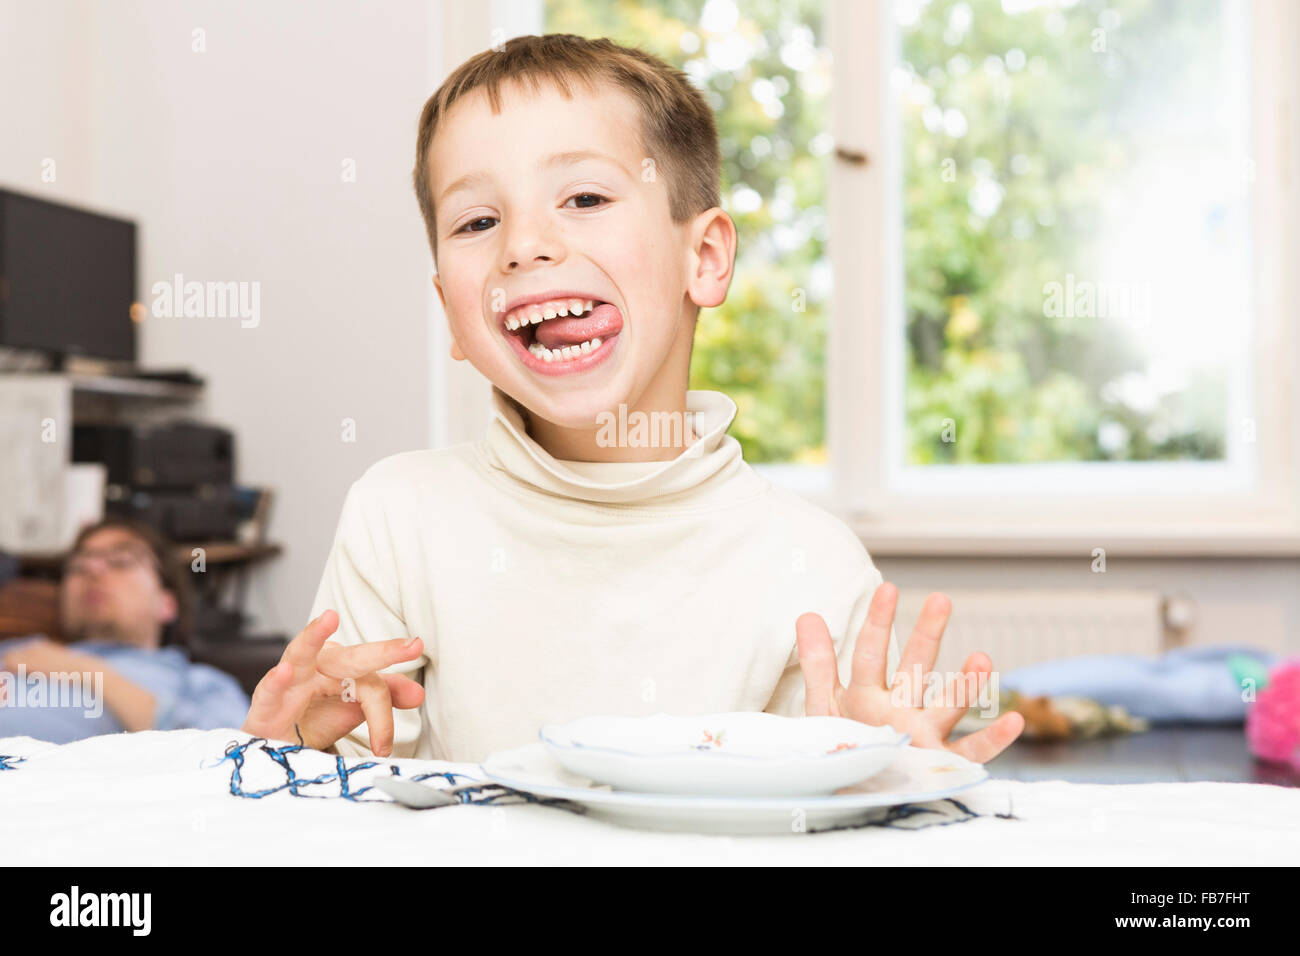 Portrait of cute boy sticking out tongue at table Banque D'Images